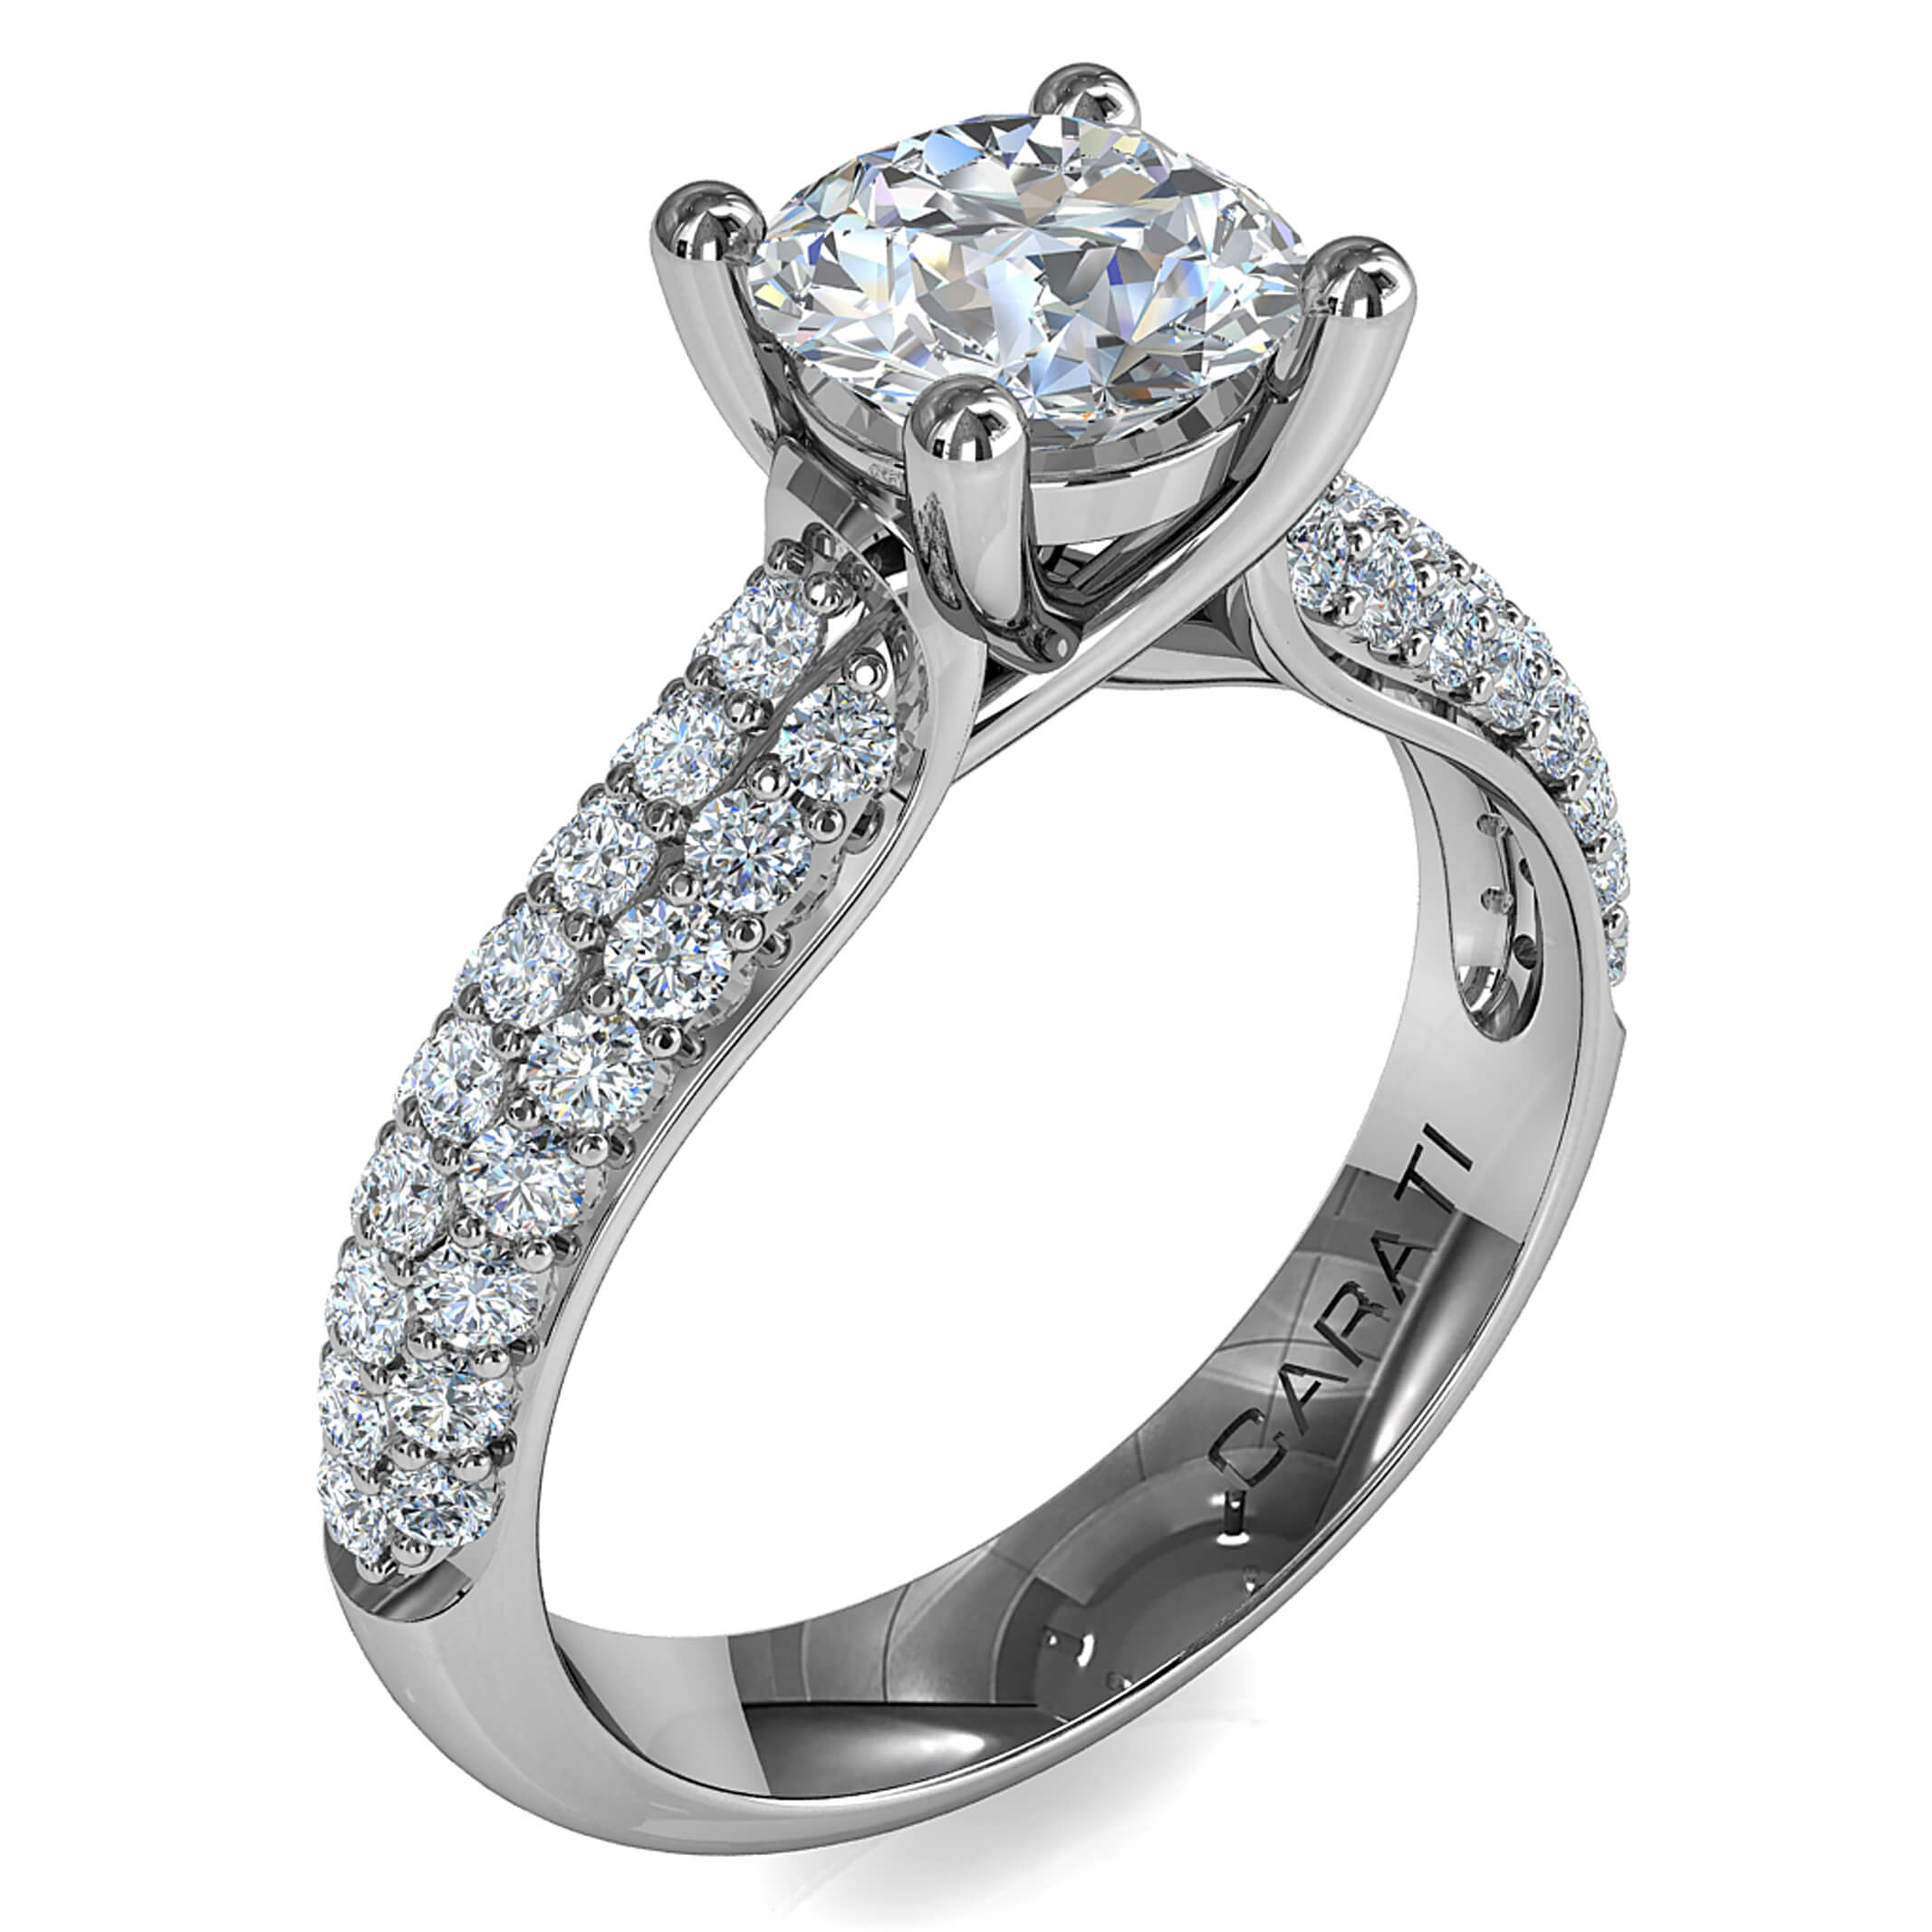 Round Brilliant Cut Solitaire Diamond Engagement Ring, 4 Button Claws Set on a Wide Three Row Pavé Band with Classic Support Bar Undersetting.